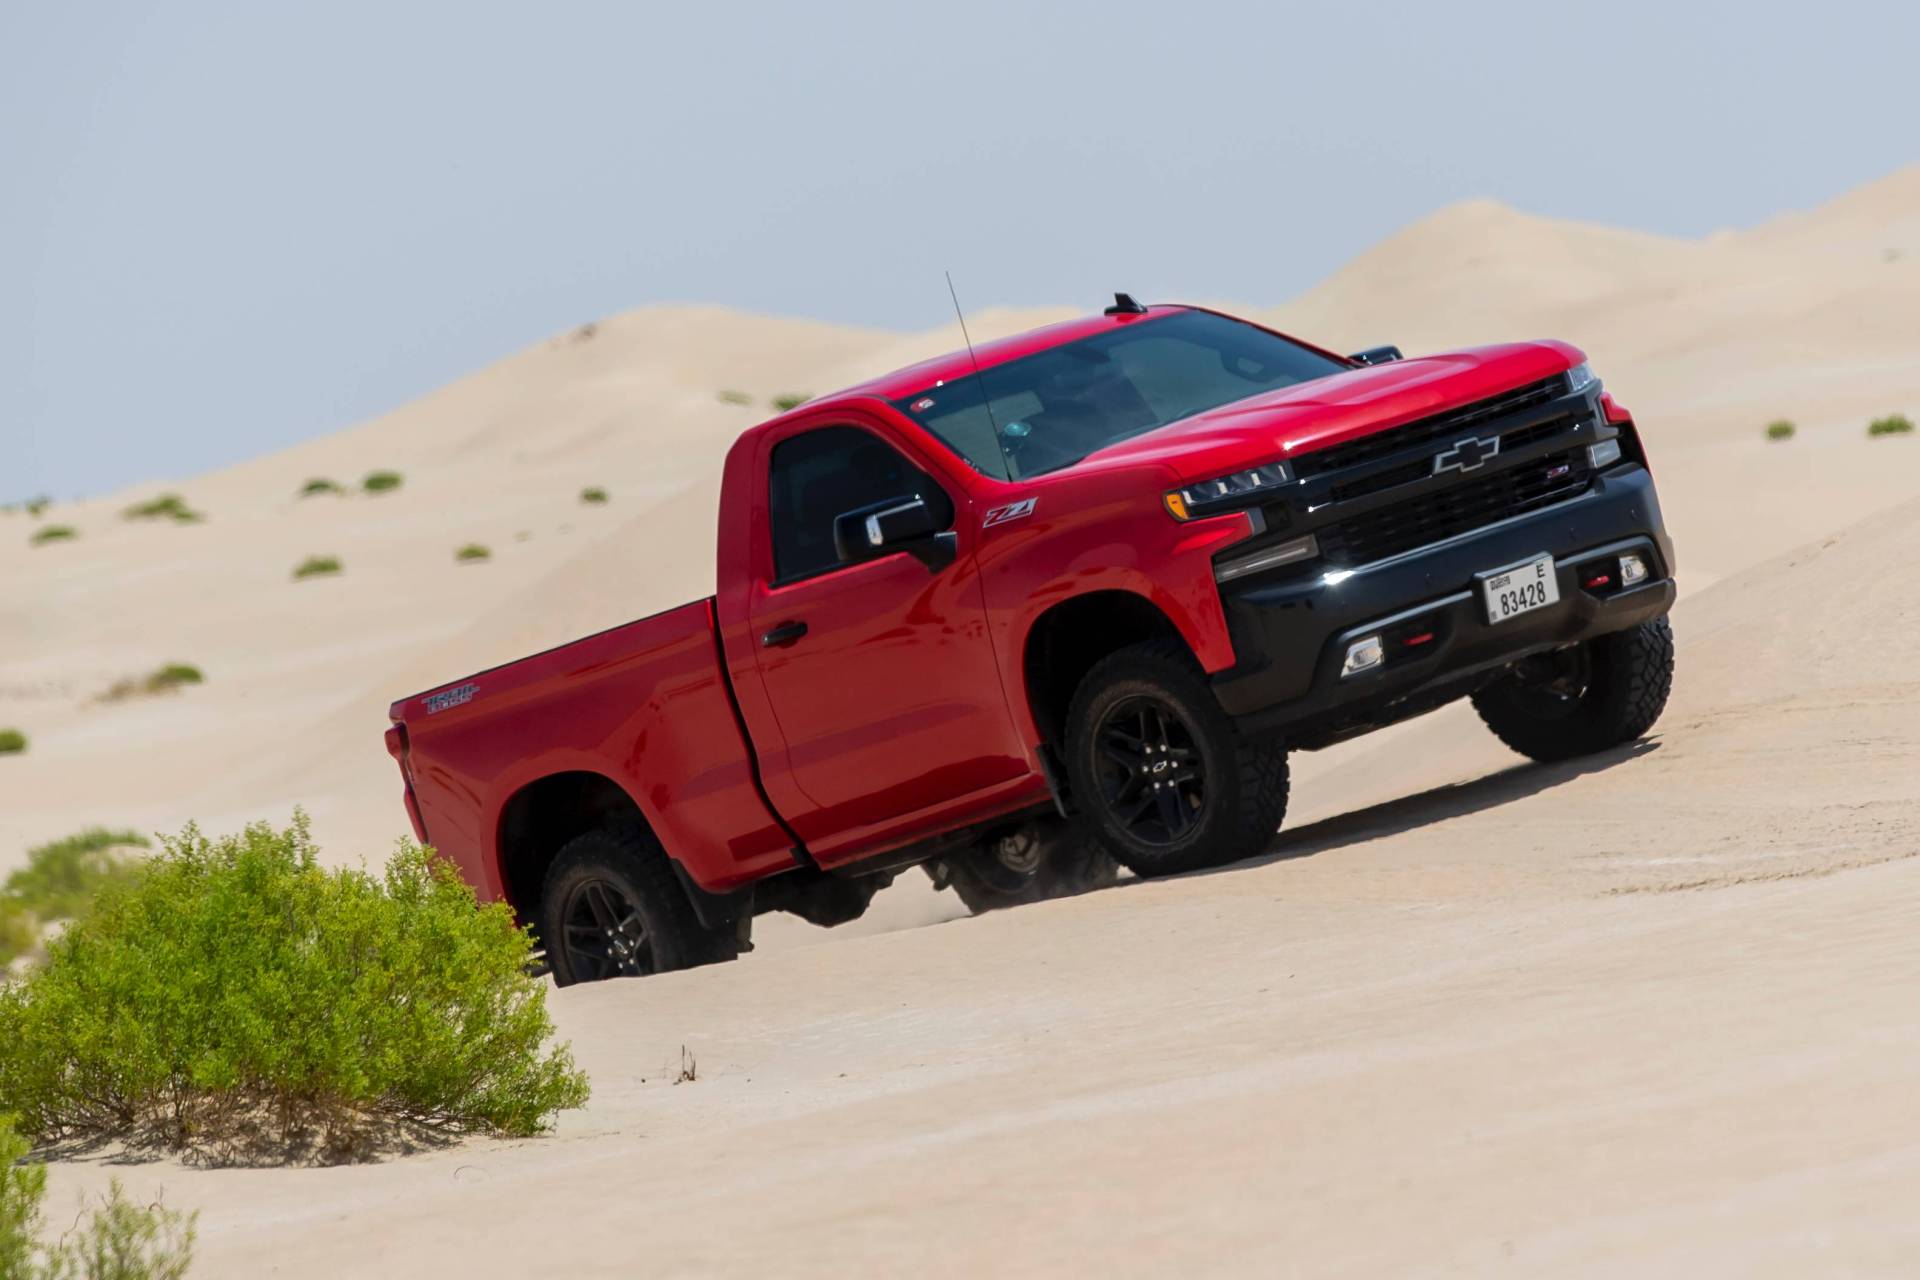 2019 Chevrolet Silverado Single Cab Available As Rst Trail Boss In The